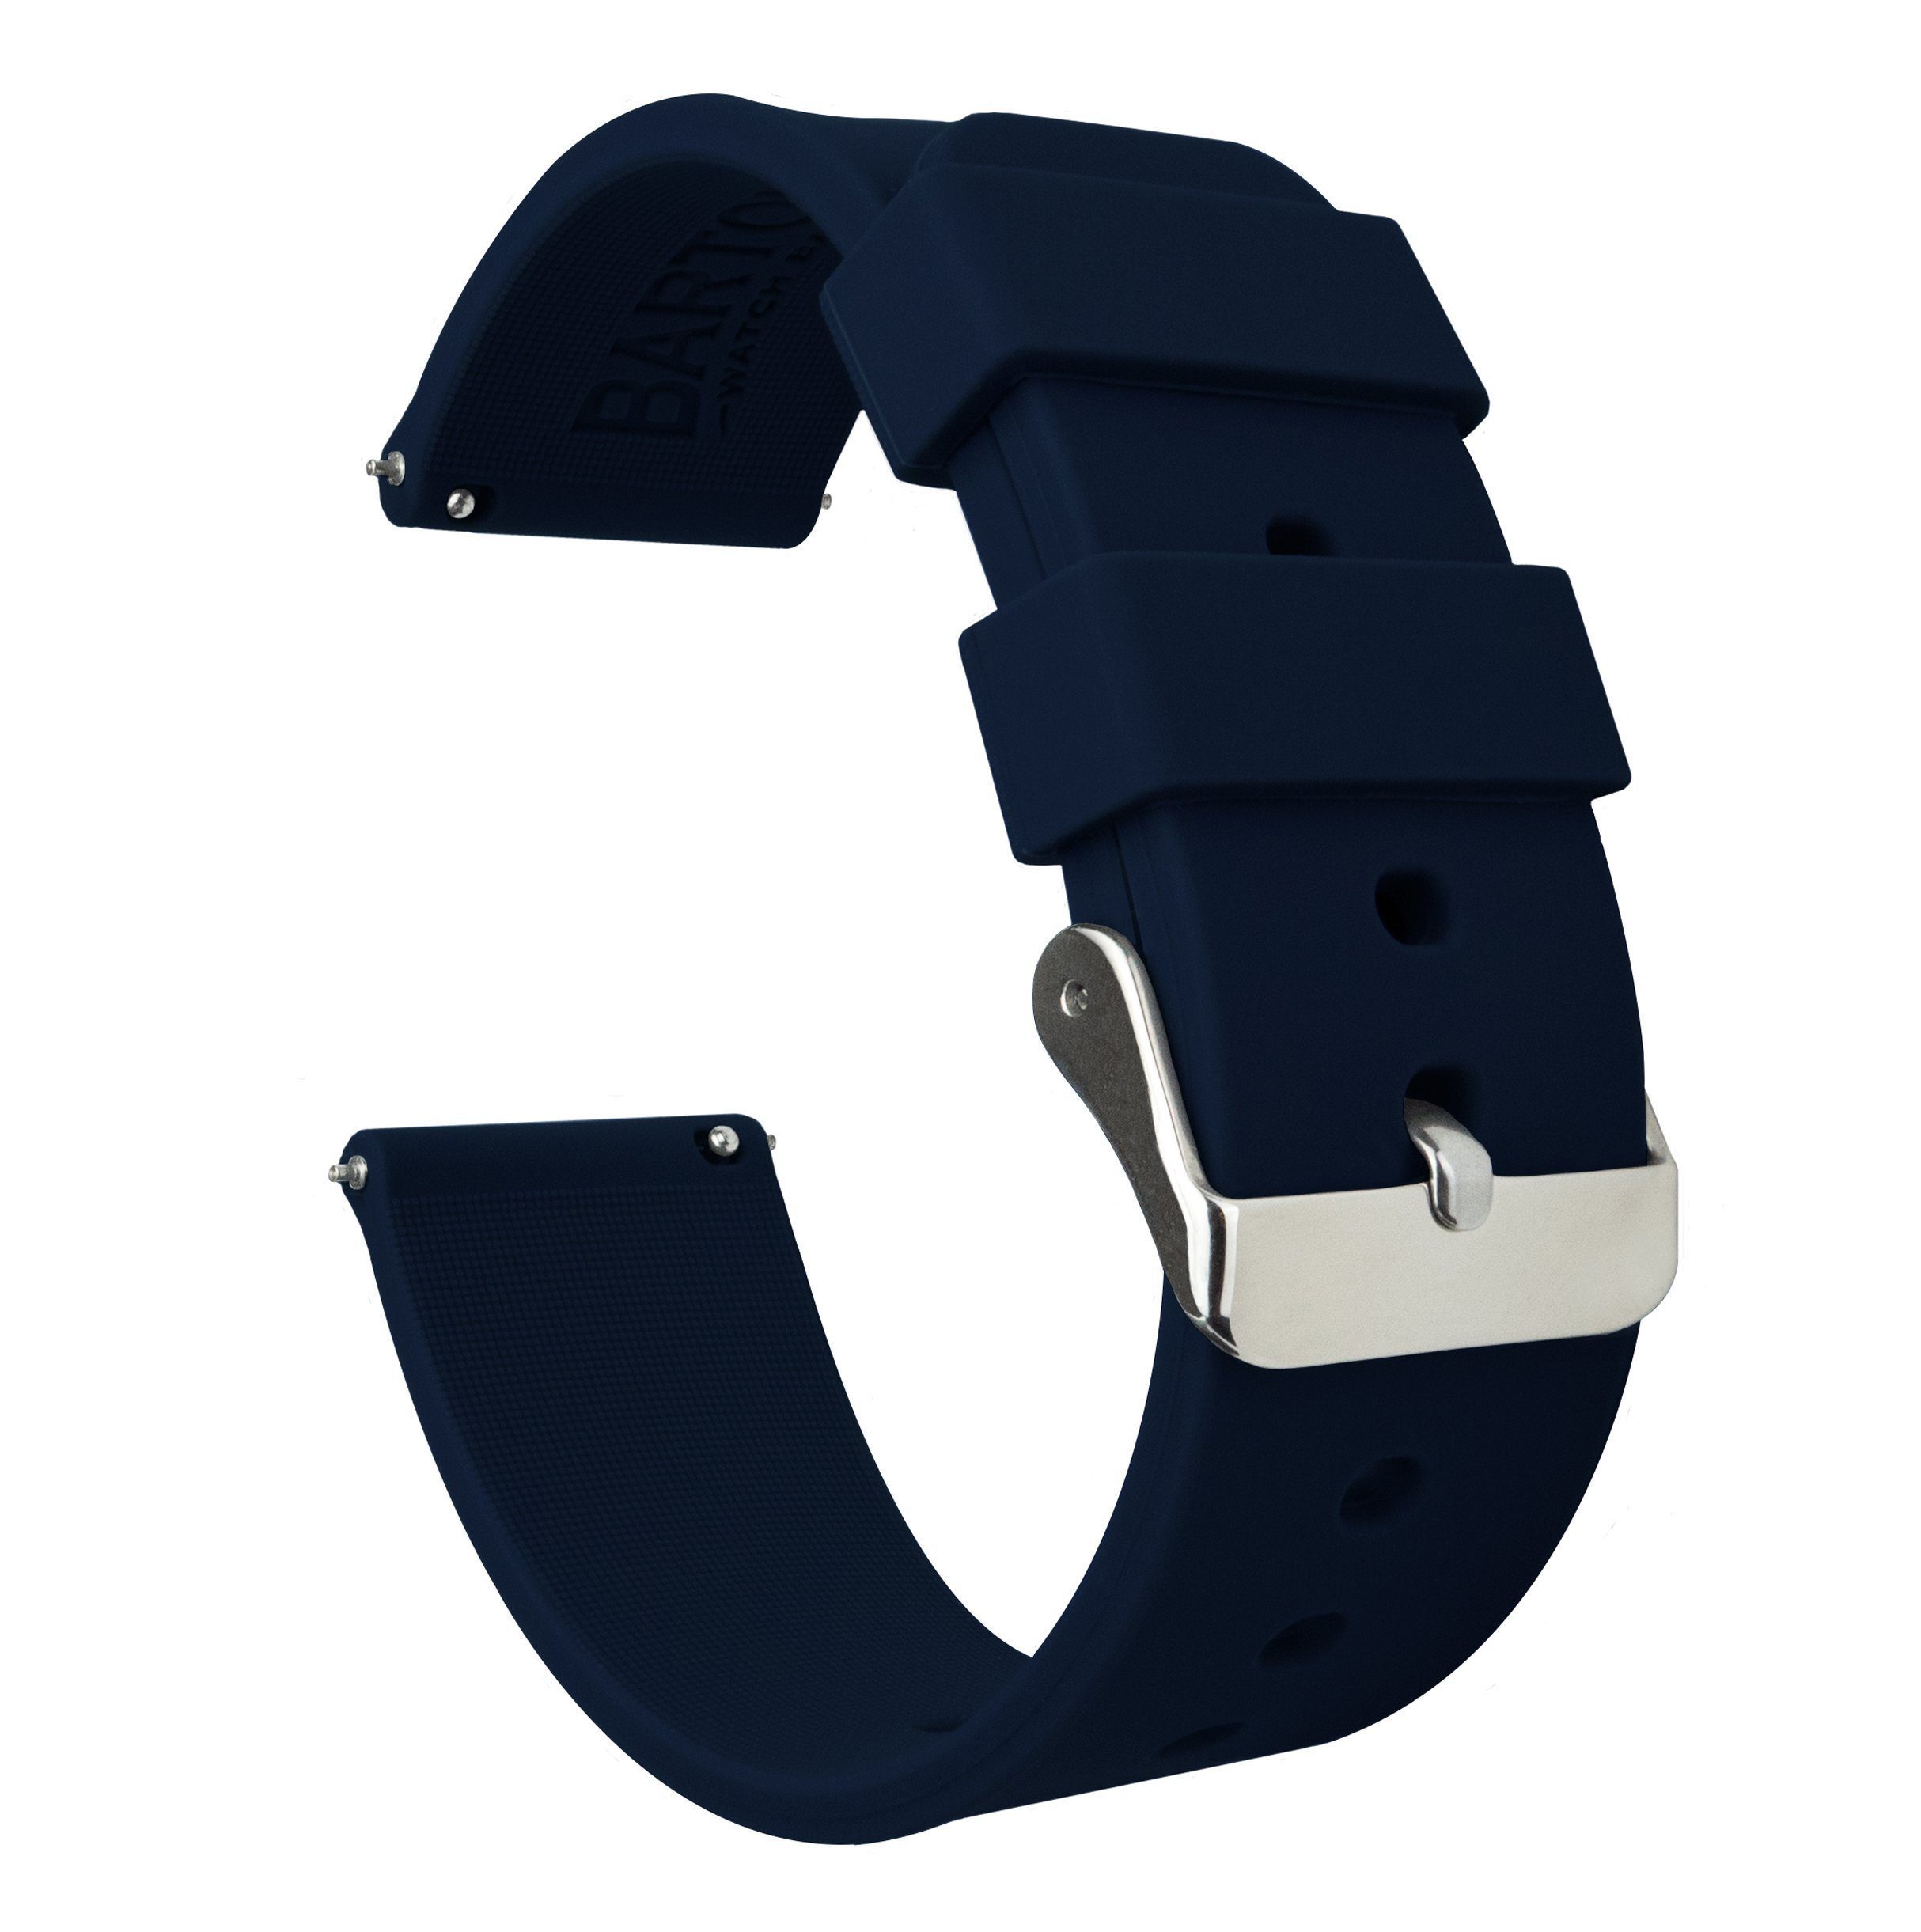 Blue Fossil Smartwatch Band | Fossil Q Watch Band – Barton Watch Bands